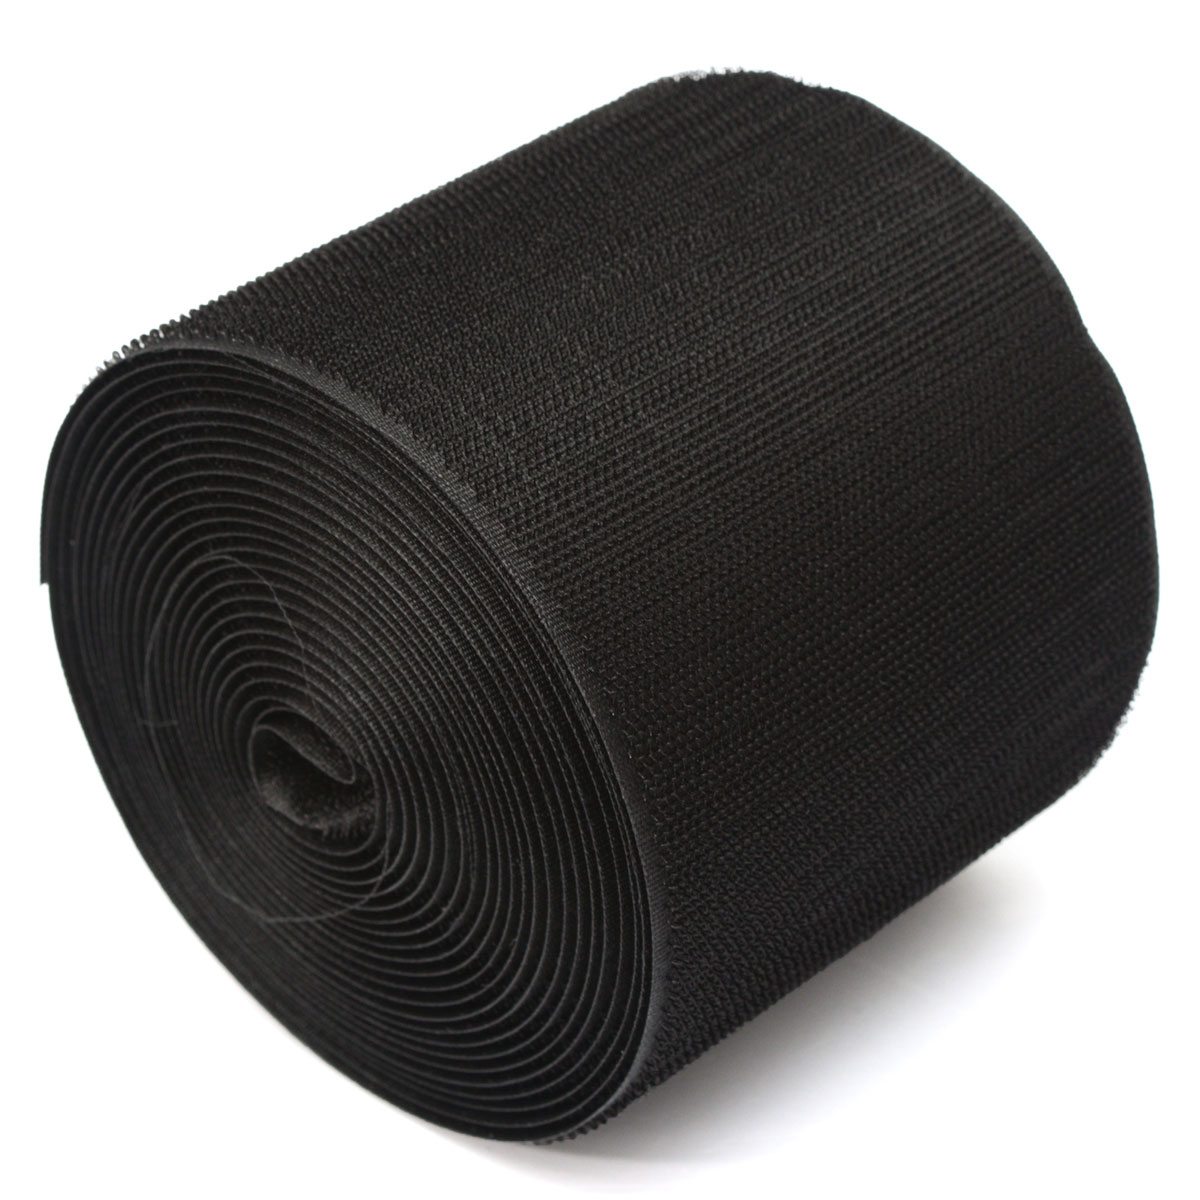 Find 5m Black Nylon Cable Cover For Carpet for Sale on Gipsybee.com with cryptocurrencies